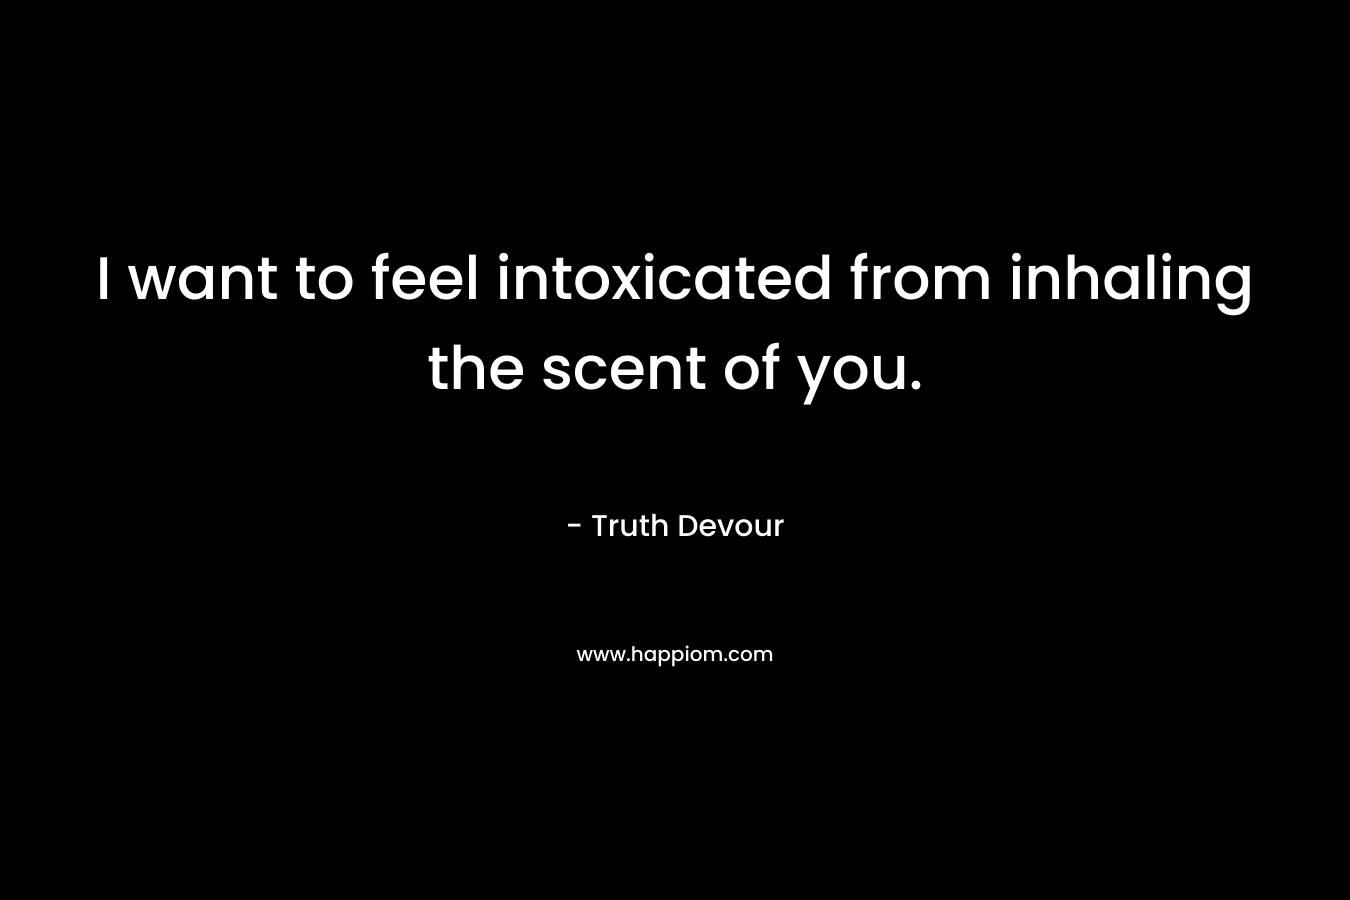 I want to feel intoxicated from inhaling the scent of you.